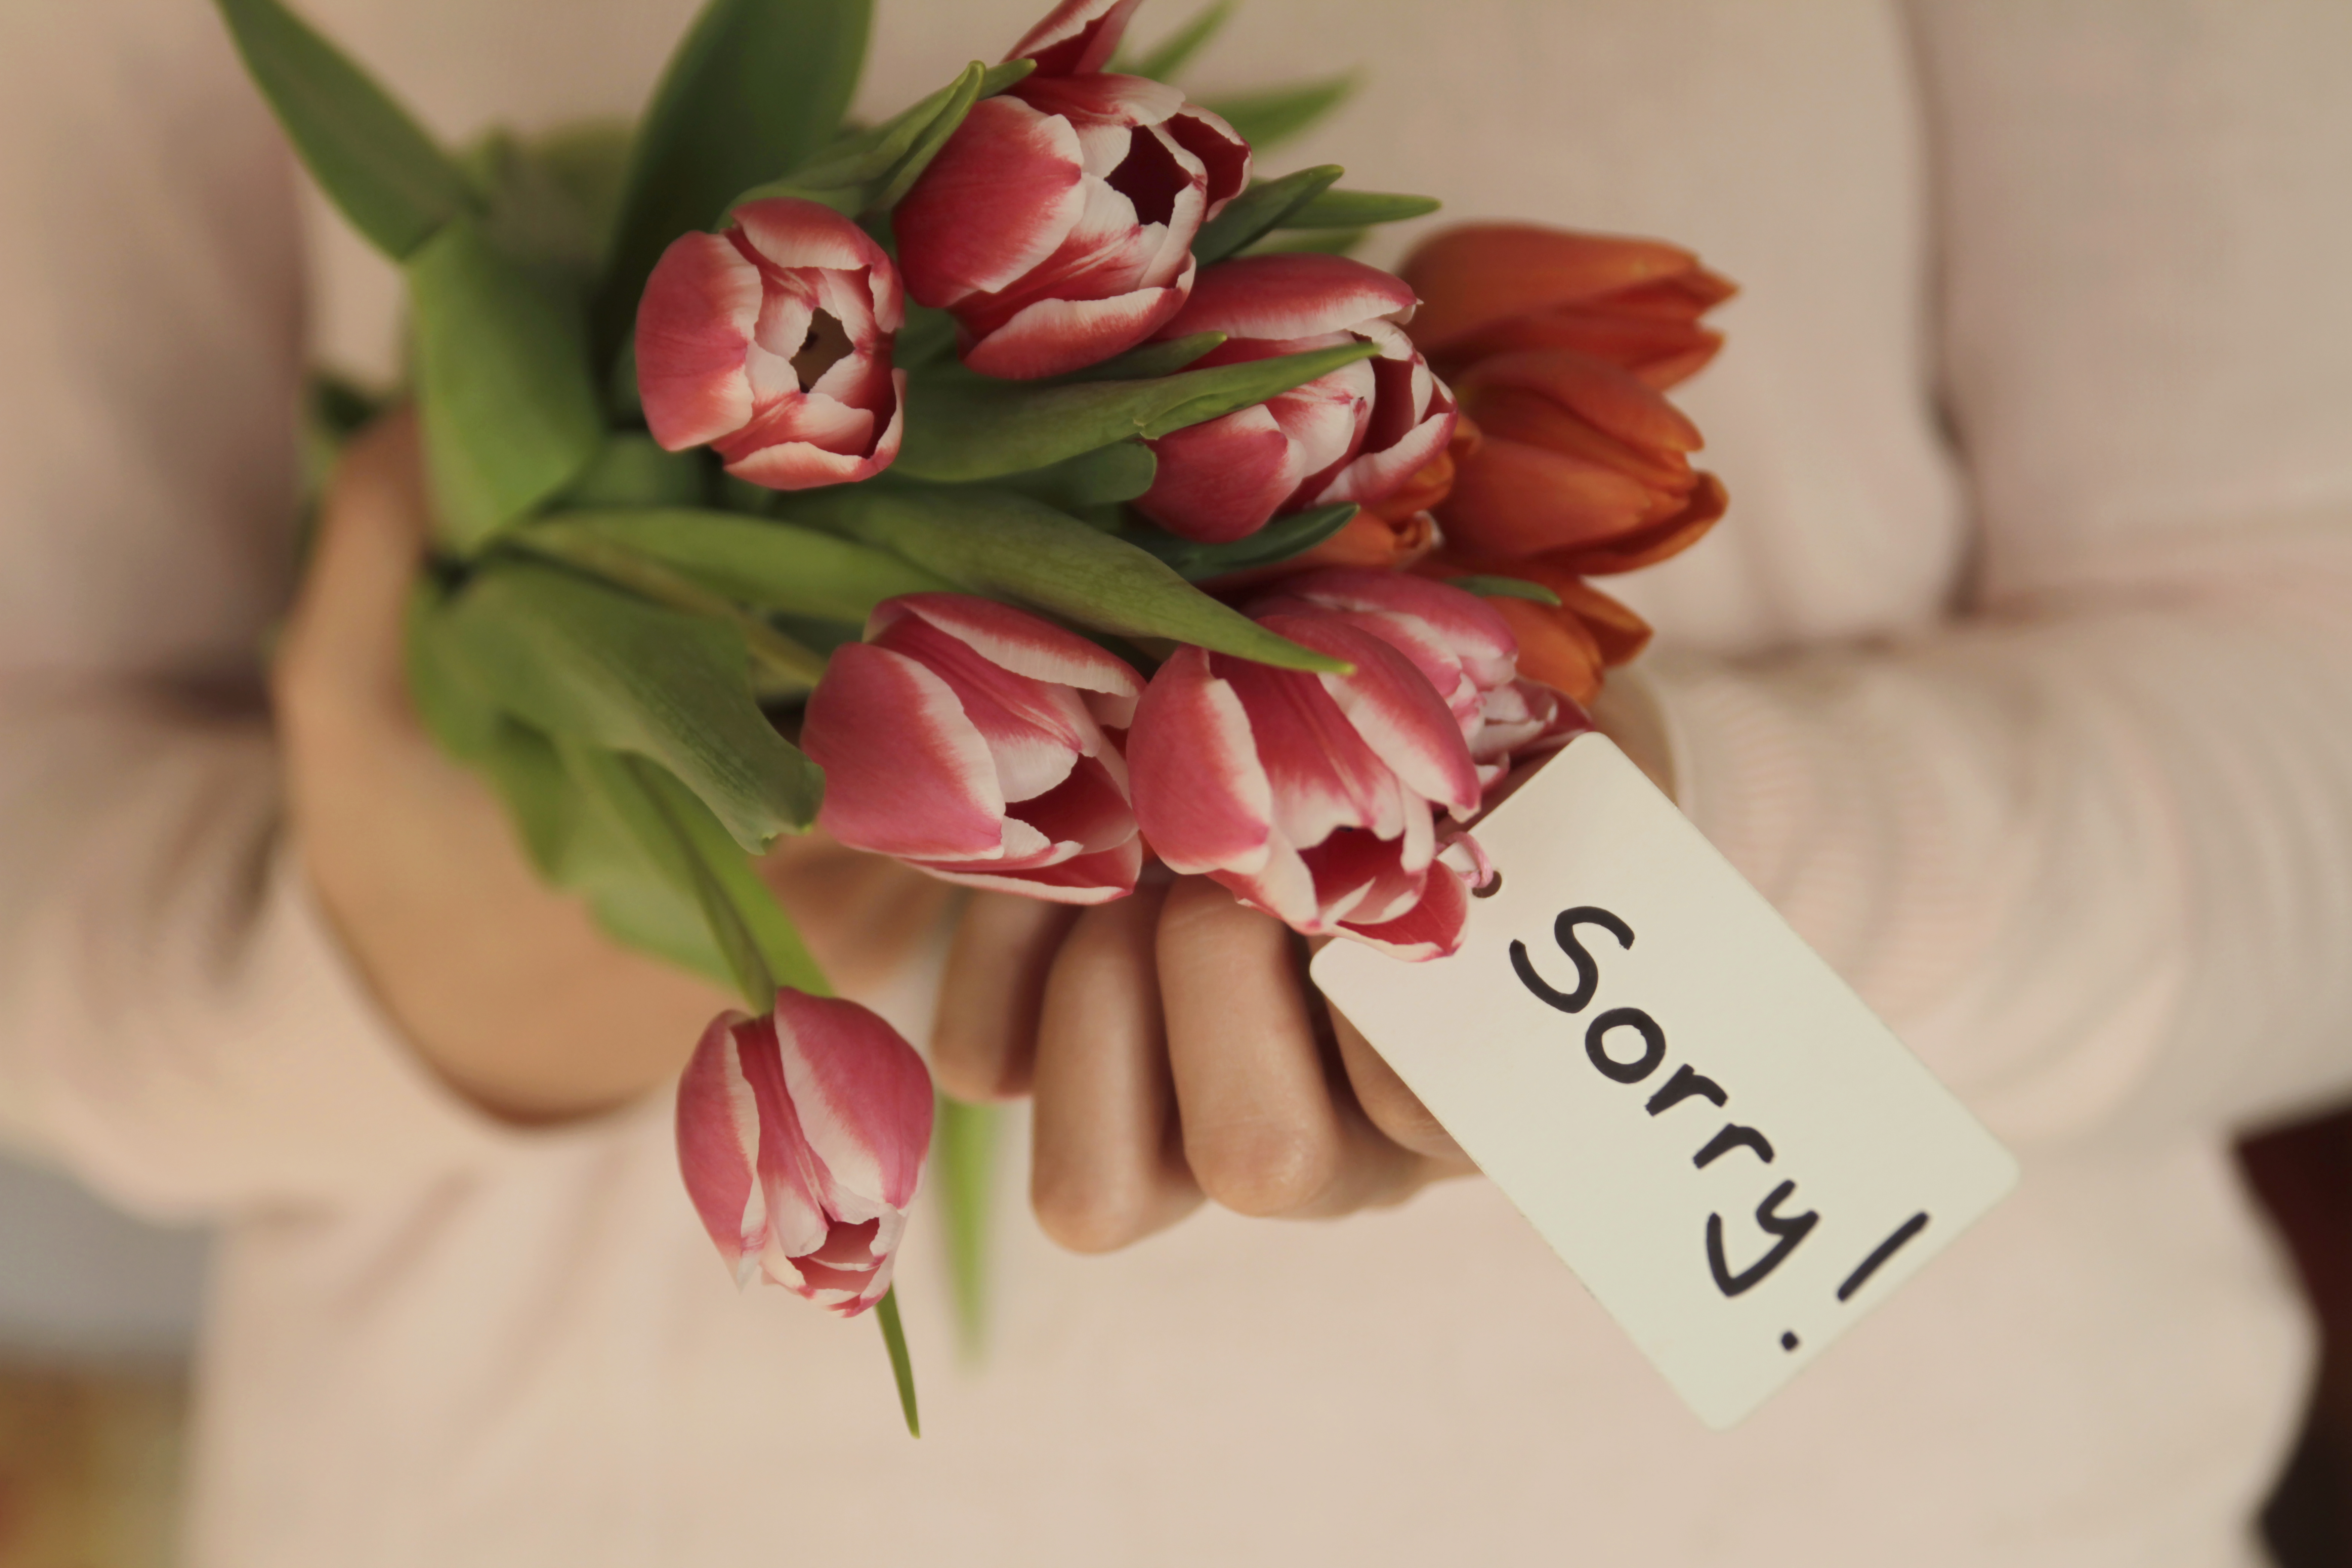 Flowers with a note saying sorry | Source: Getty Images